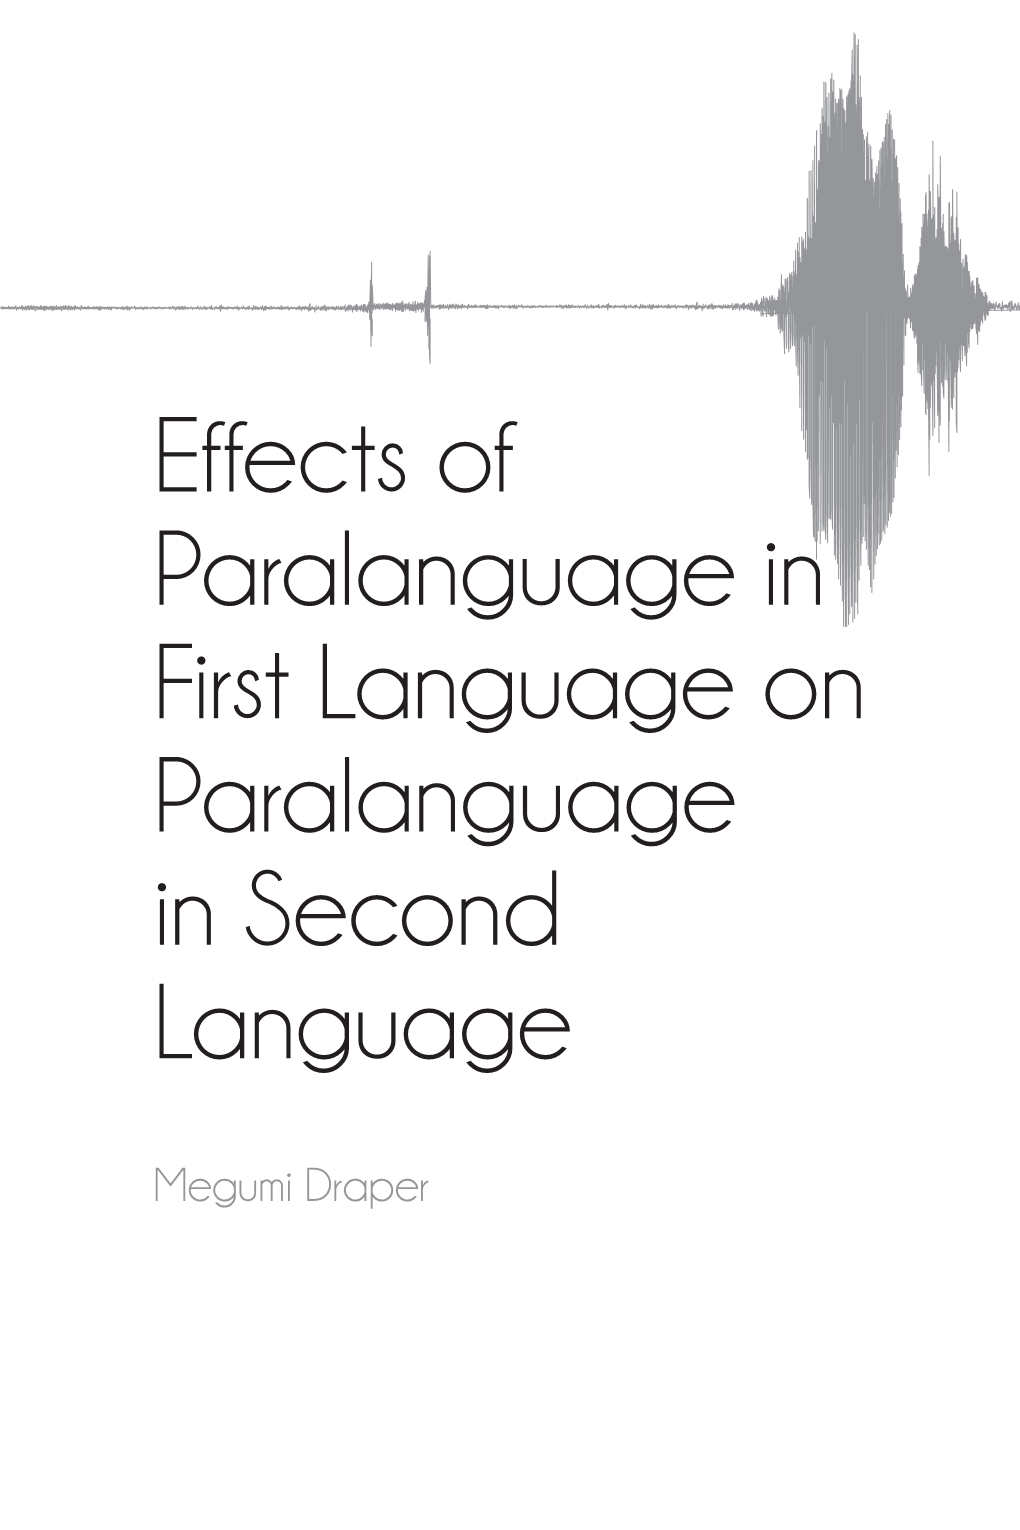 Effects of Paralanguage in First Language on Paralanguage in Second Language